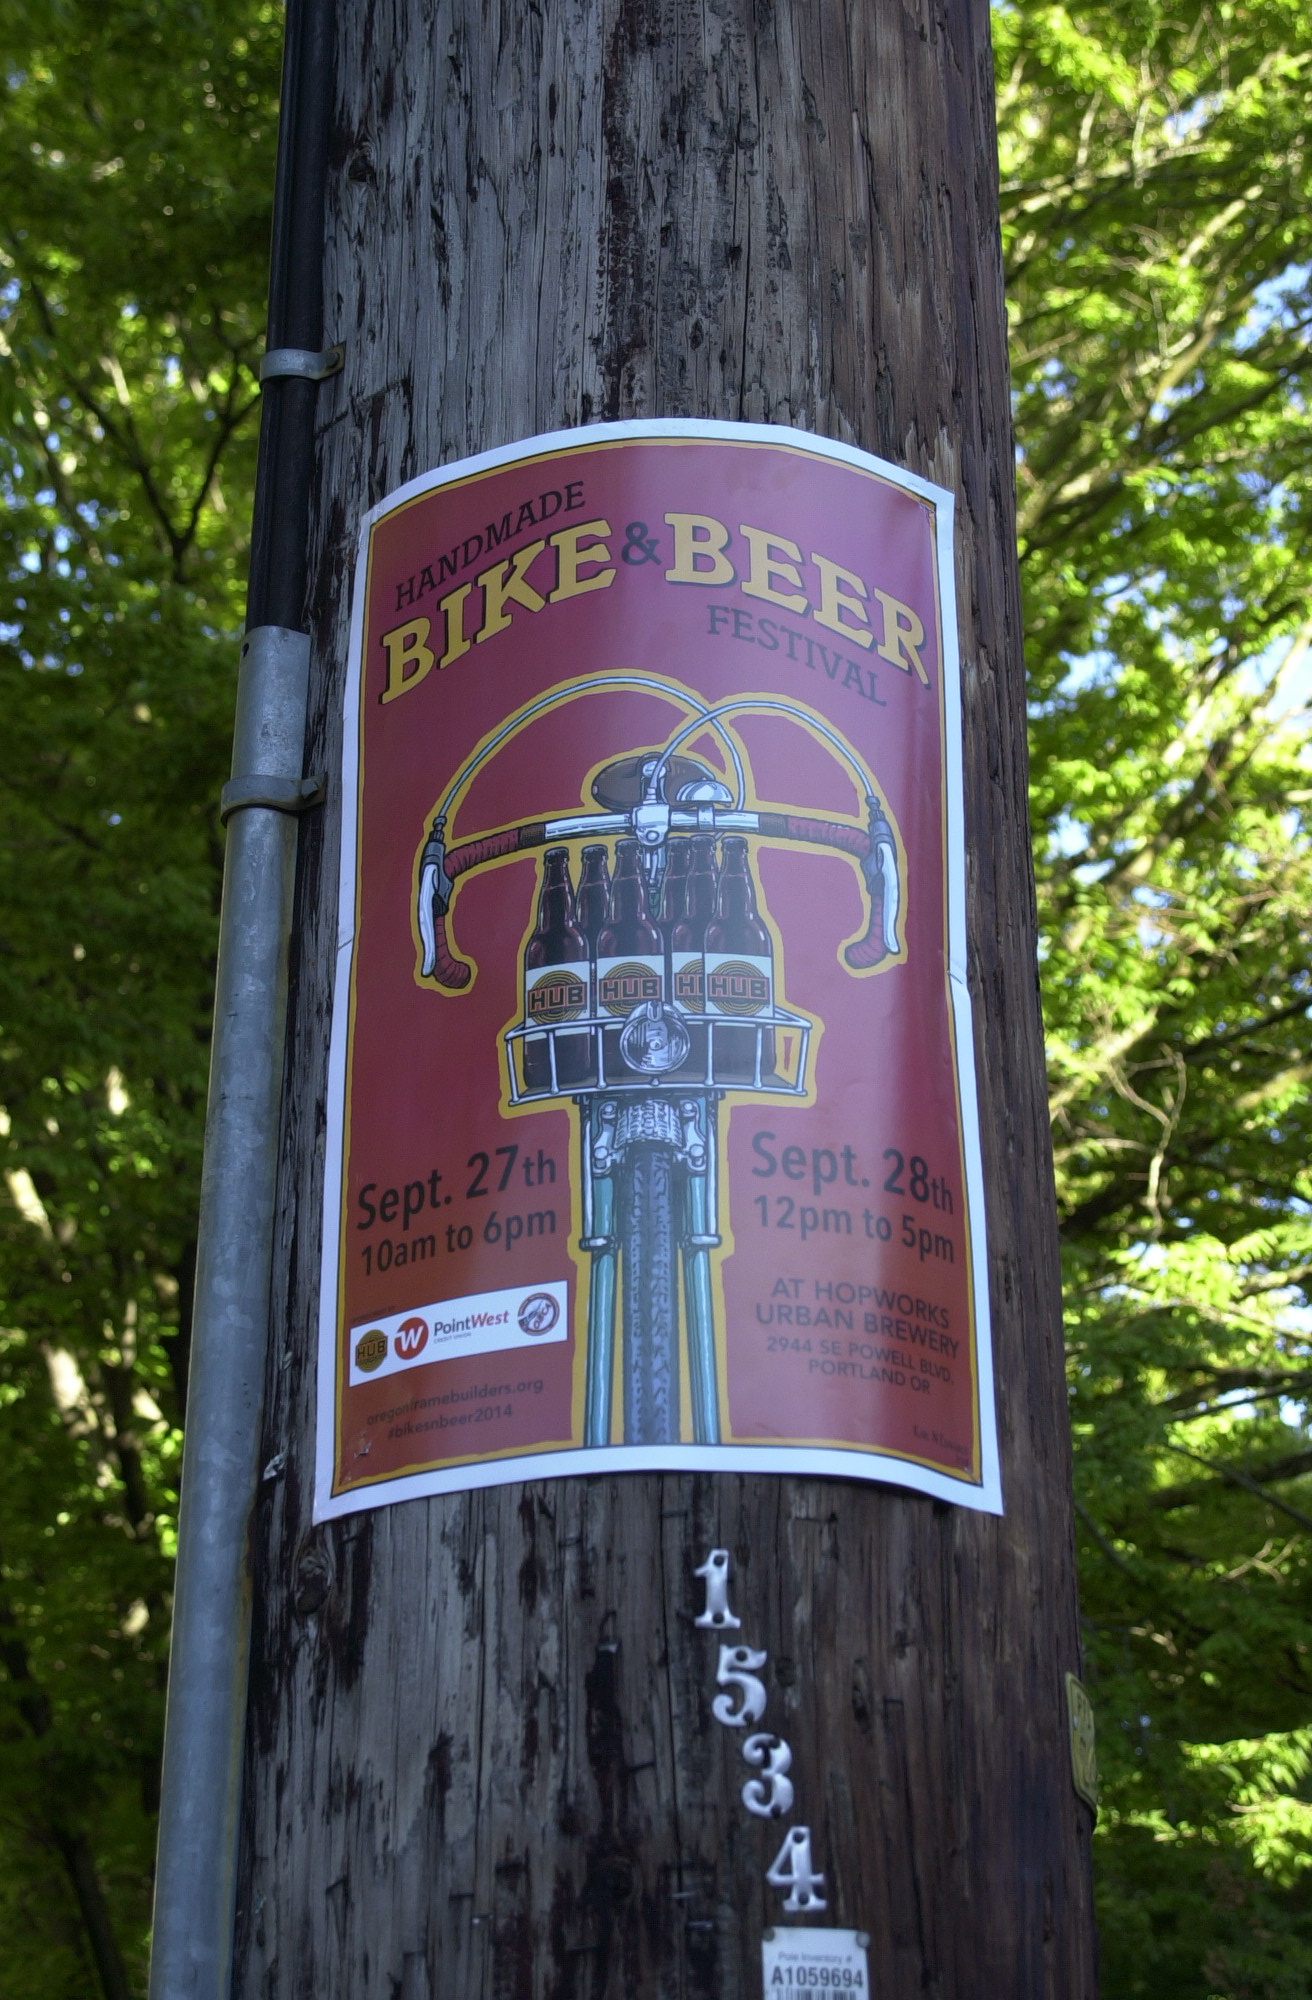 2014 Oregon Handmade Bike and Beer Festival poster on the telephone pole at SW 17th. and Market St.